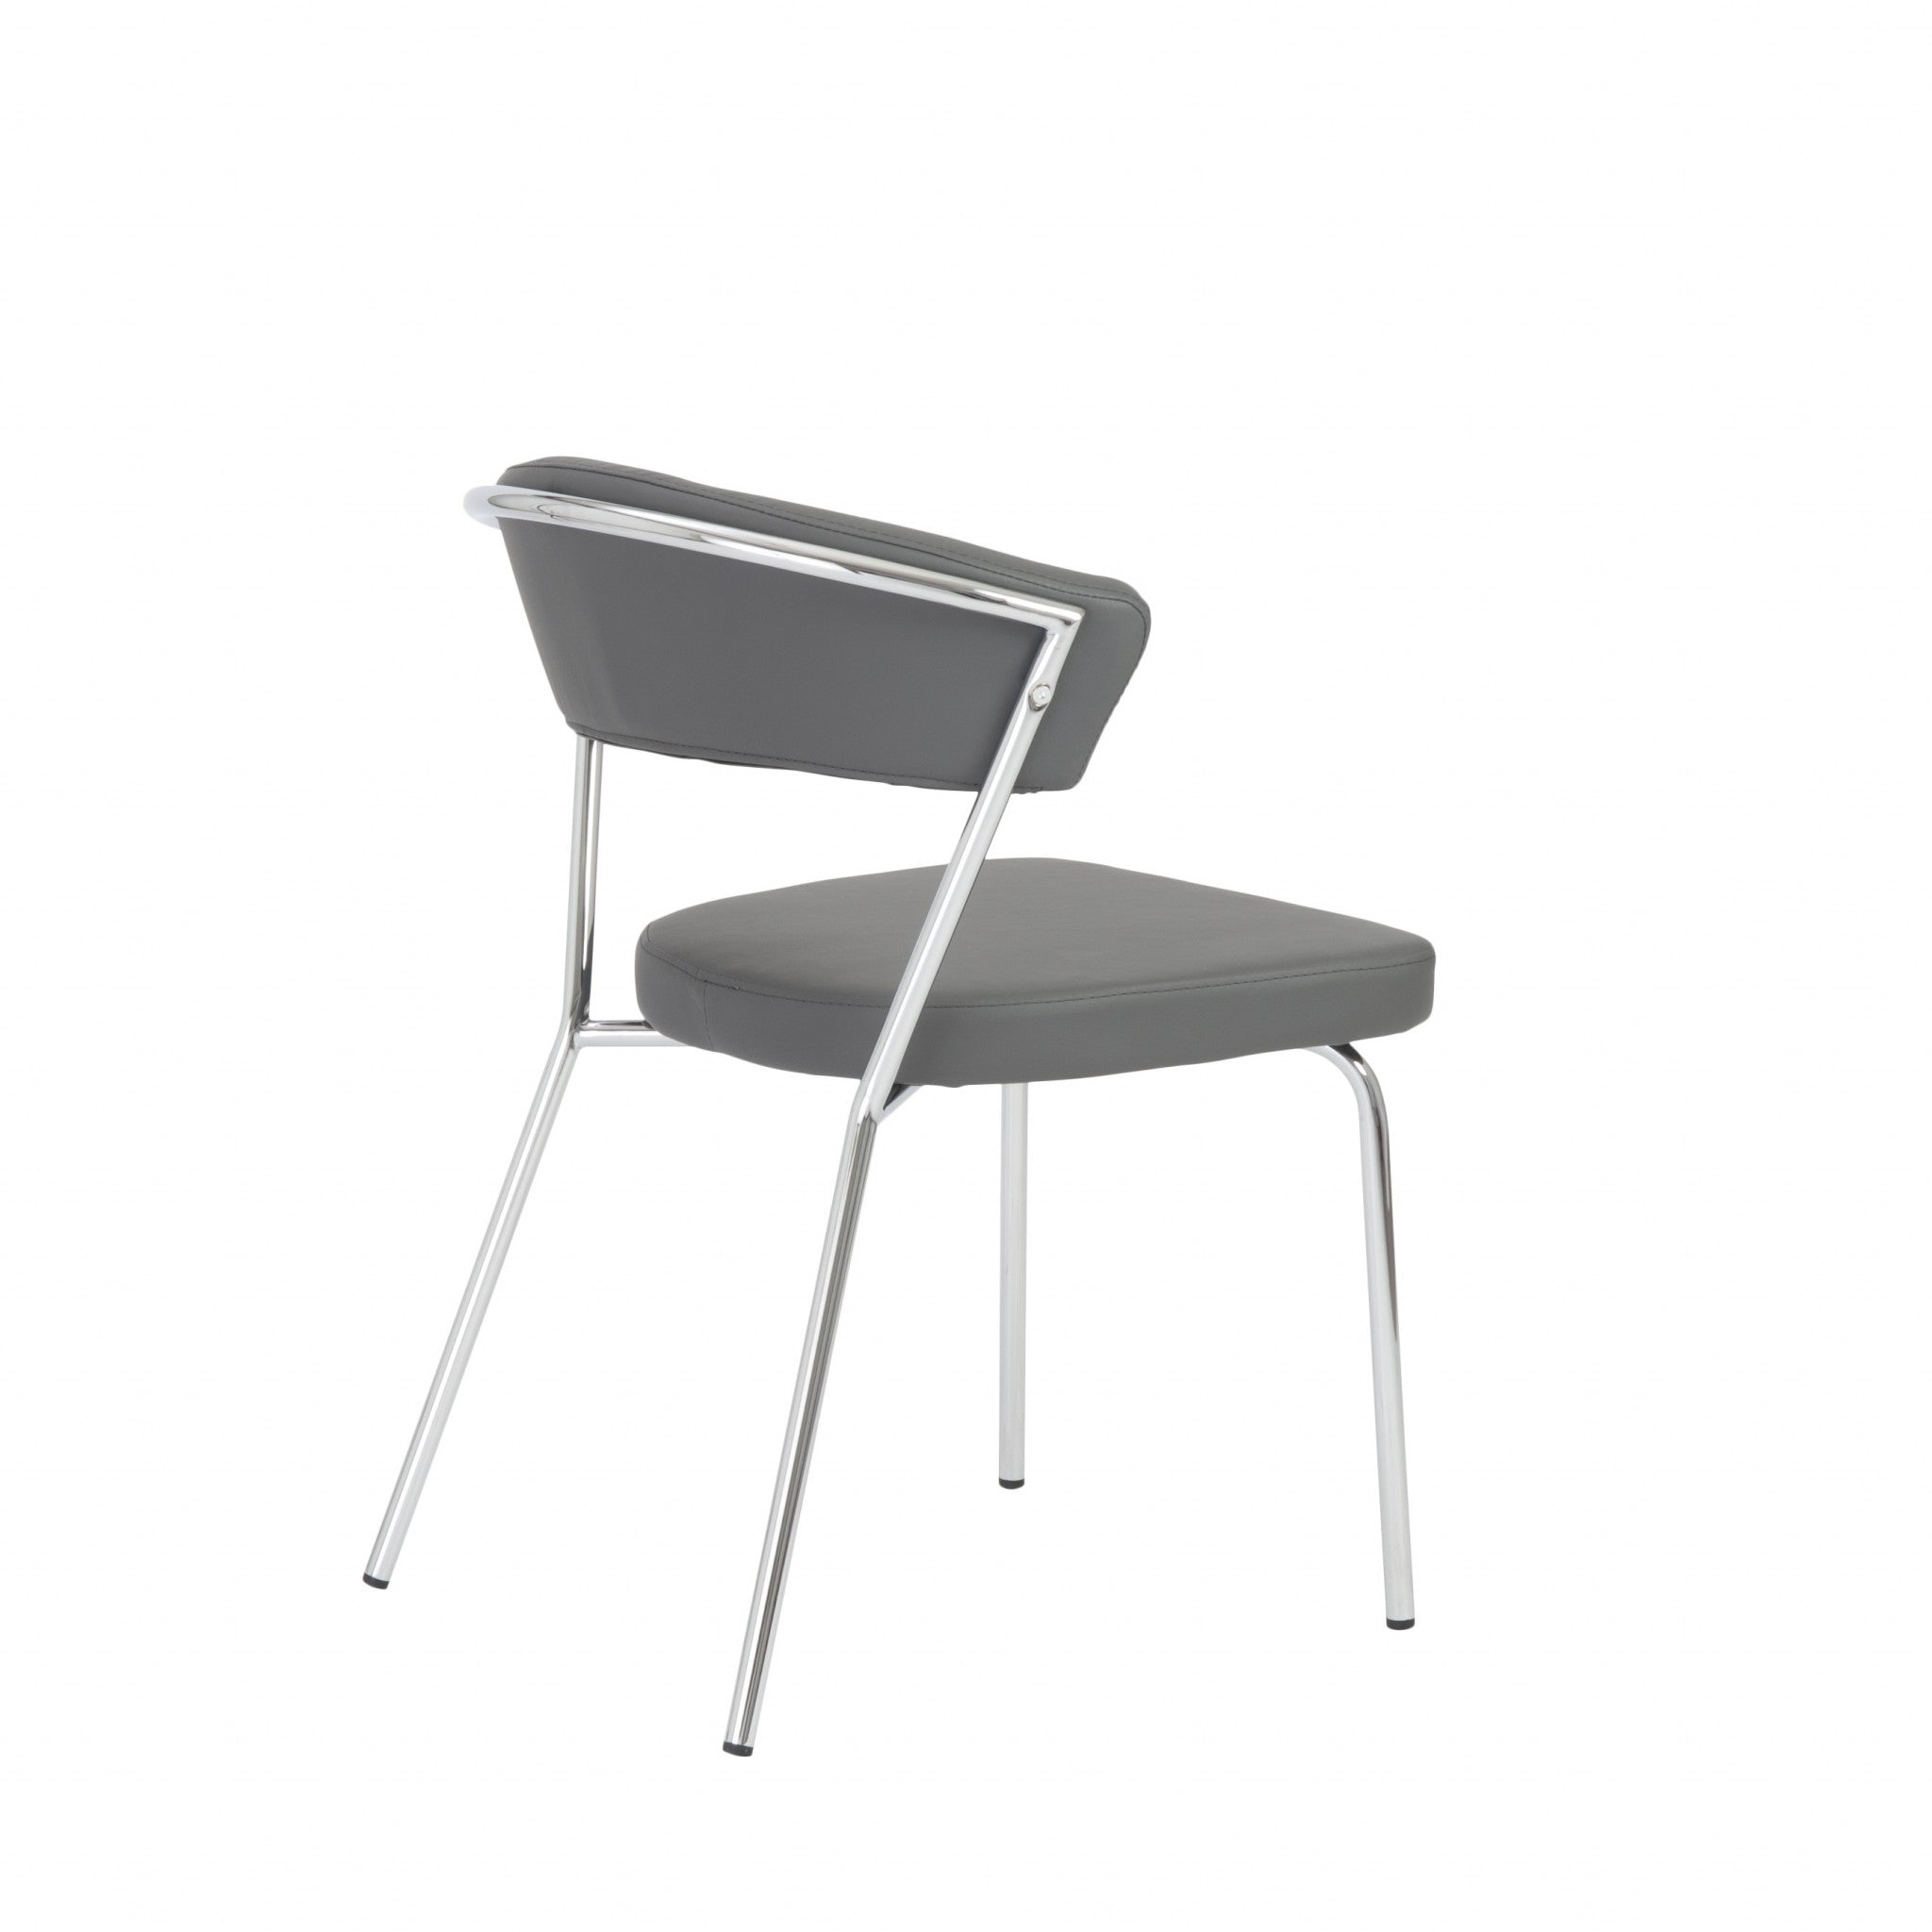 Set of Two Curved Gray Chrome Dining Chairs